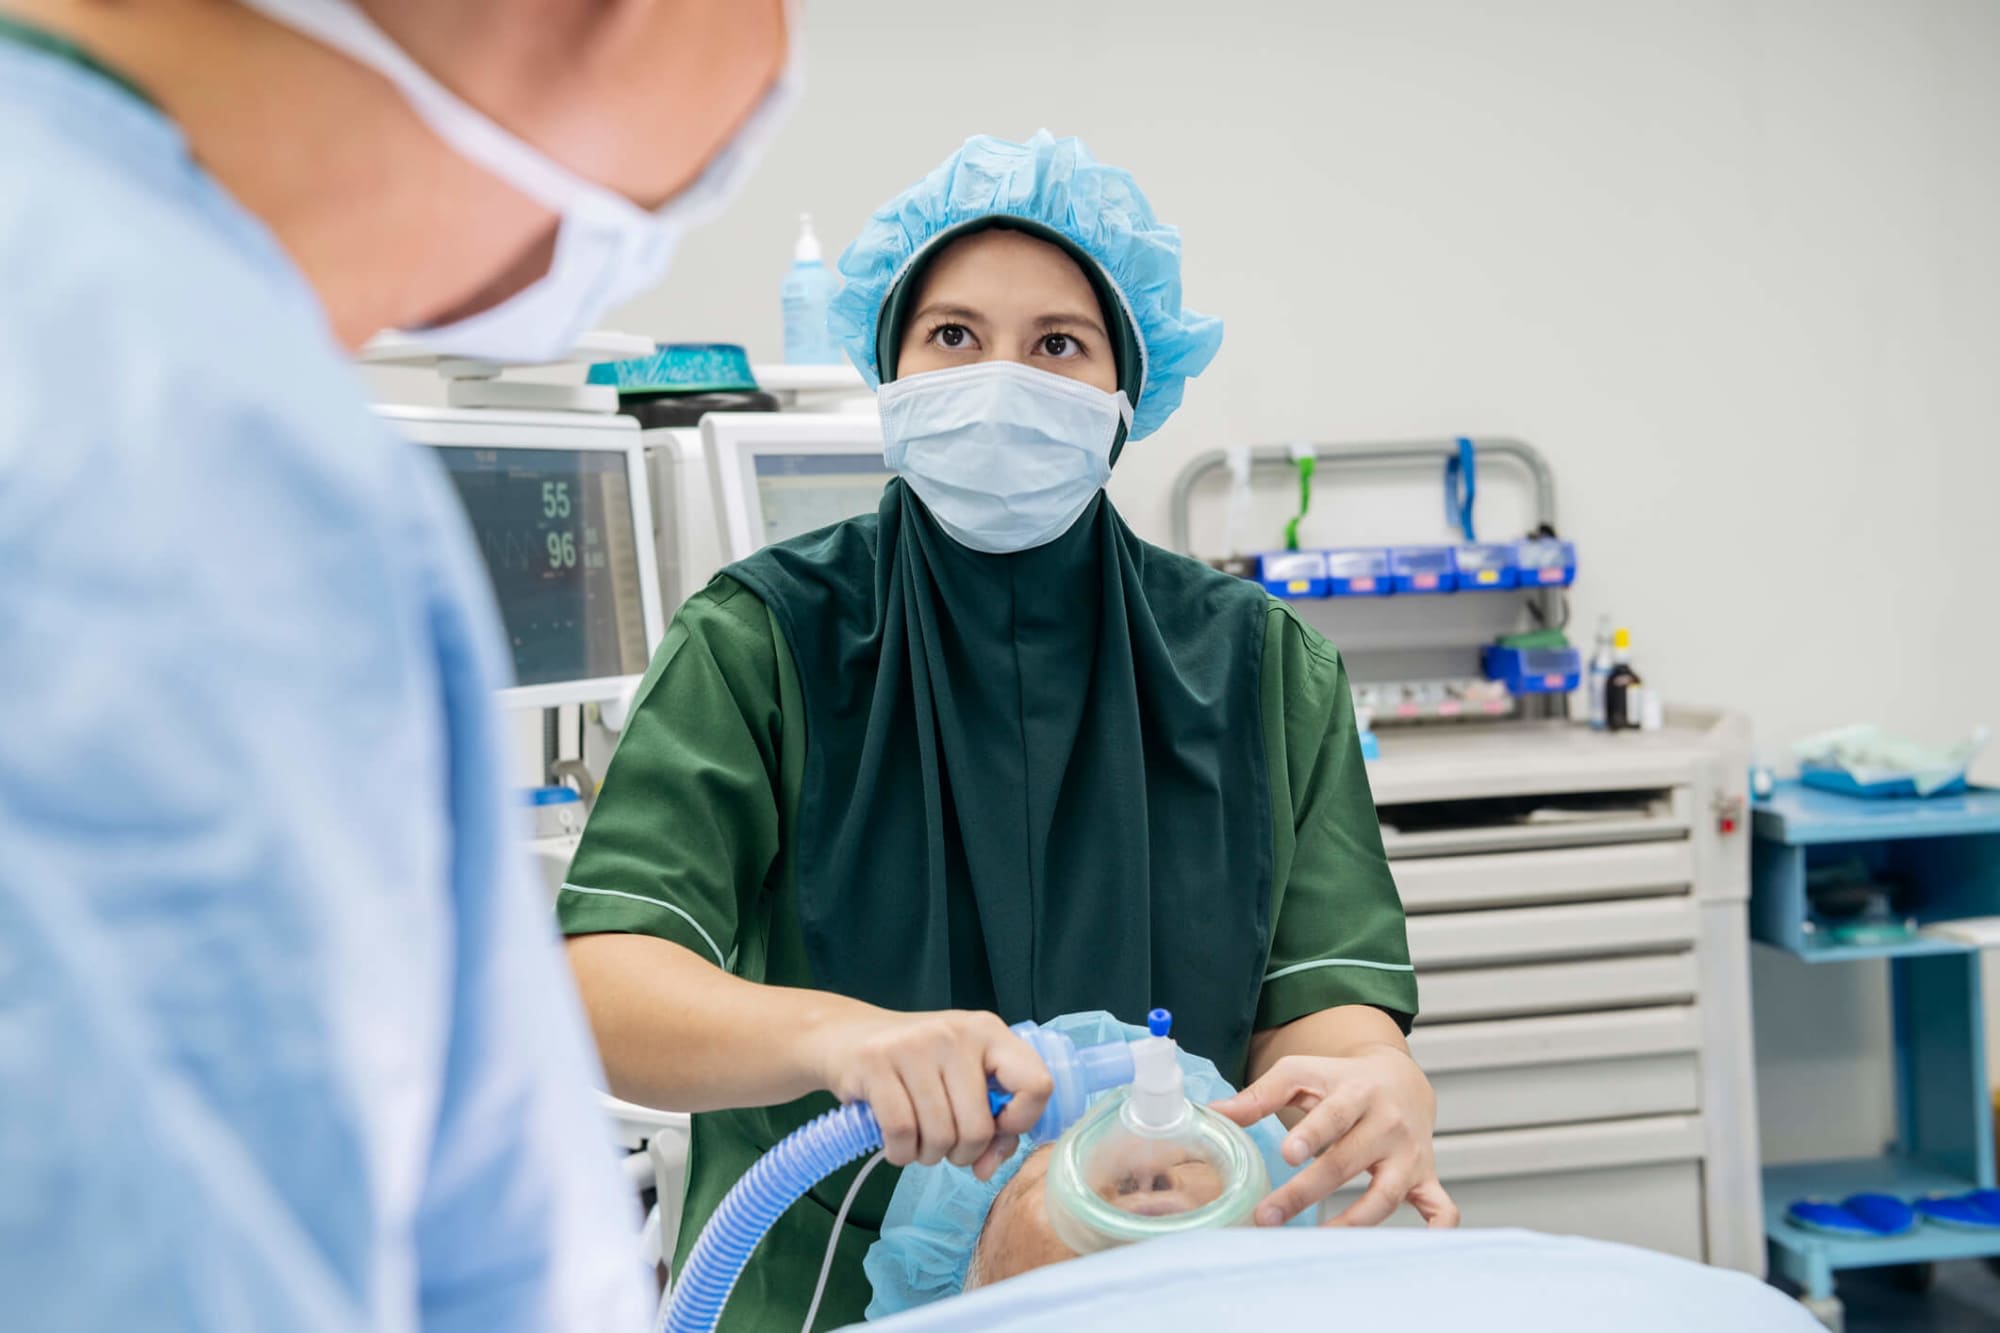 A female nurse anesthetist places an oxygen mask on a senior patient while sedating him in preparation for a surgical procedure in a hospital operating room. The young Malaysian nurse is wearing a dark green hijab over her green scrubs, and has a mask and medical cap on. A heart monitor and medical equipment are in the background. The nurse is looking towards the doctor in the foreground while awaiting his instructions.